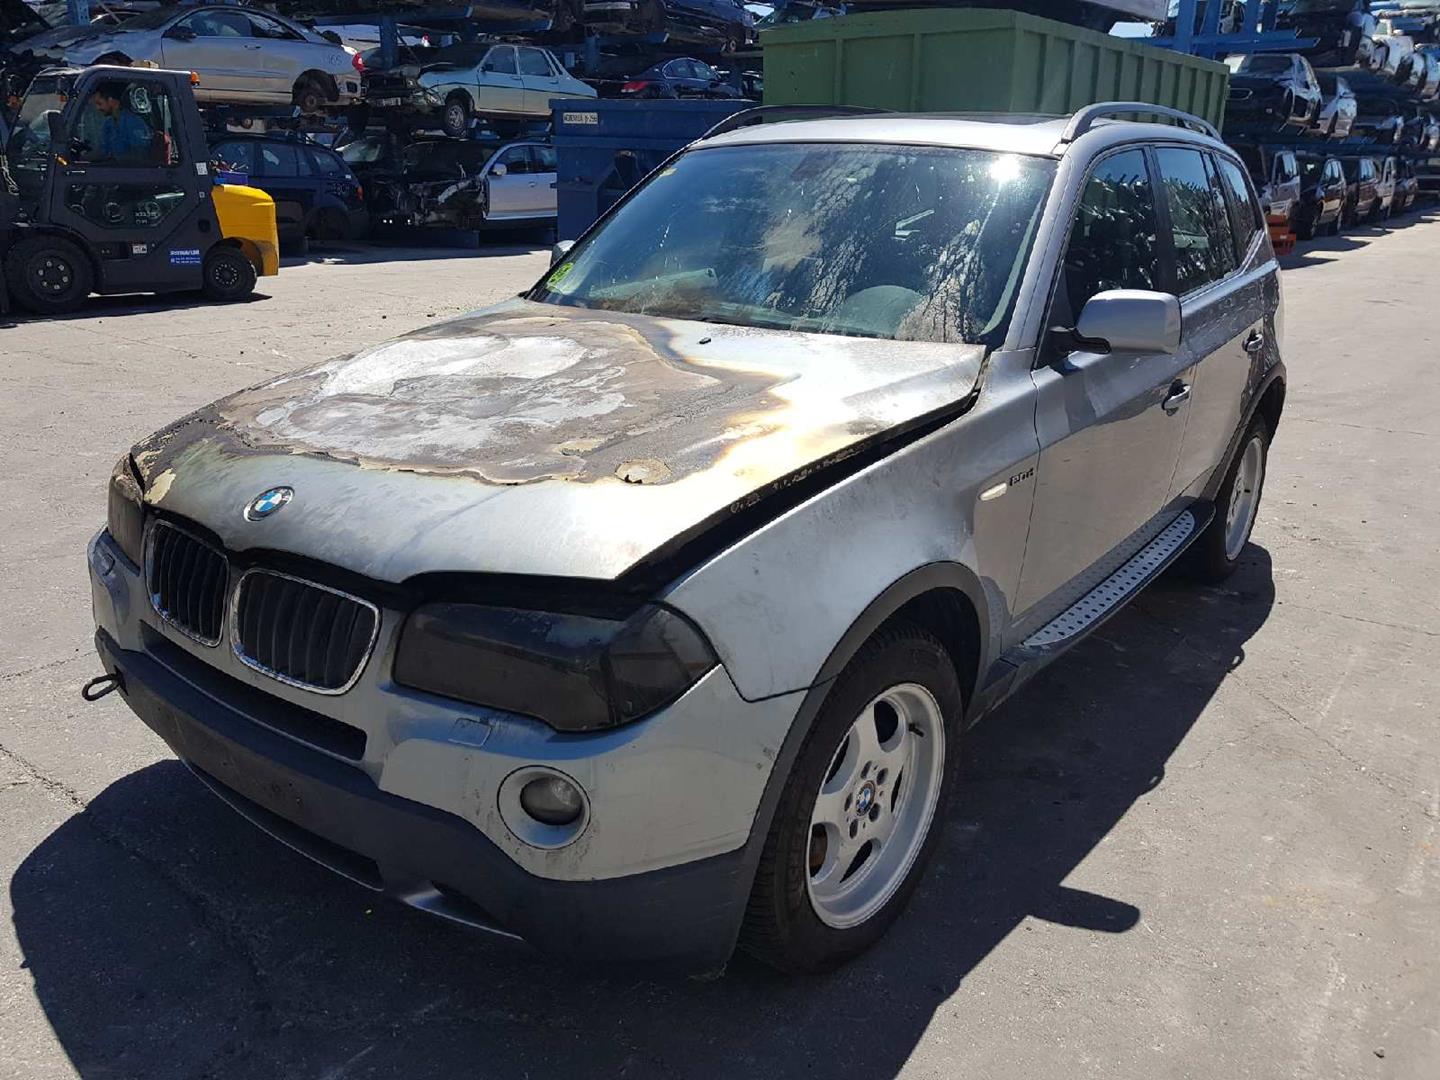 BMW X3 E83 (2003-2010) Right Side Roof Rail 51137052537, 51137052537 19743711